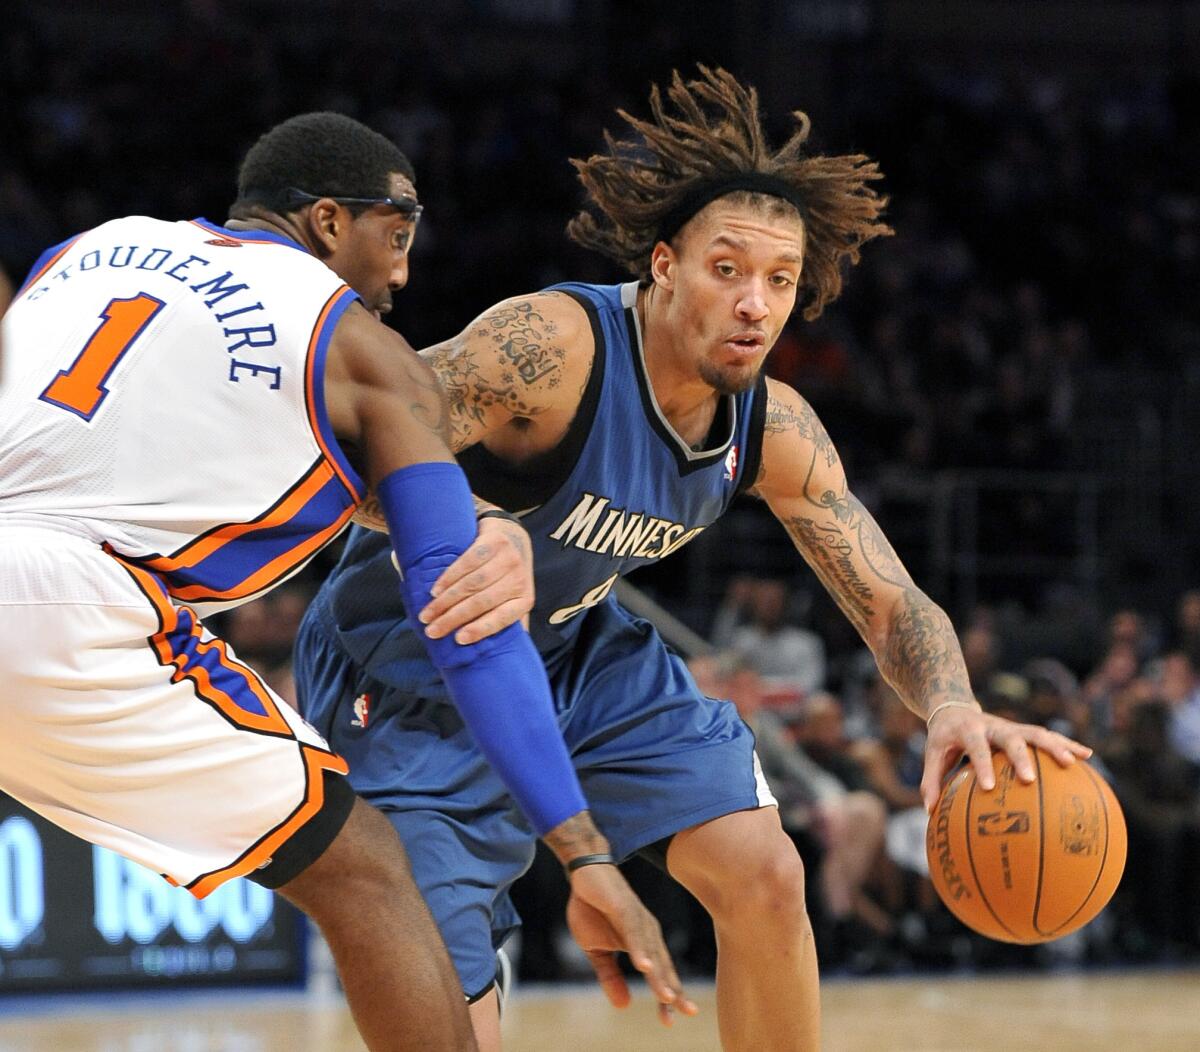 Minnesota Timberwolves forward Michael Beasley (8) tries to drive the ball around New York Knicks forward Amare Stoudemire (1) during the second half of an NBA basketball game Monday, Dec. 6, 2010, in New York. The Knicks defeated the Timberwolves 121-114.